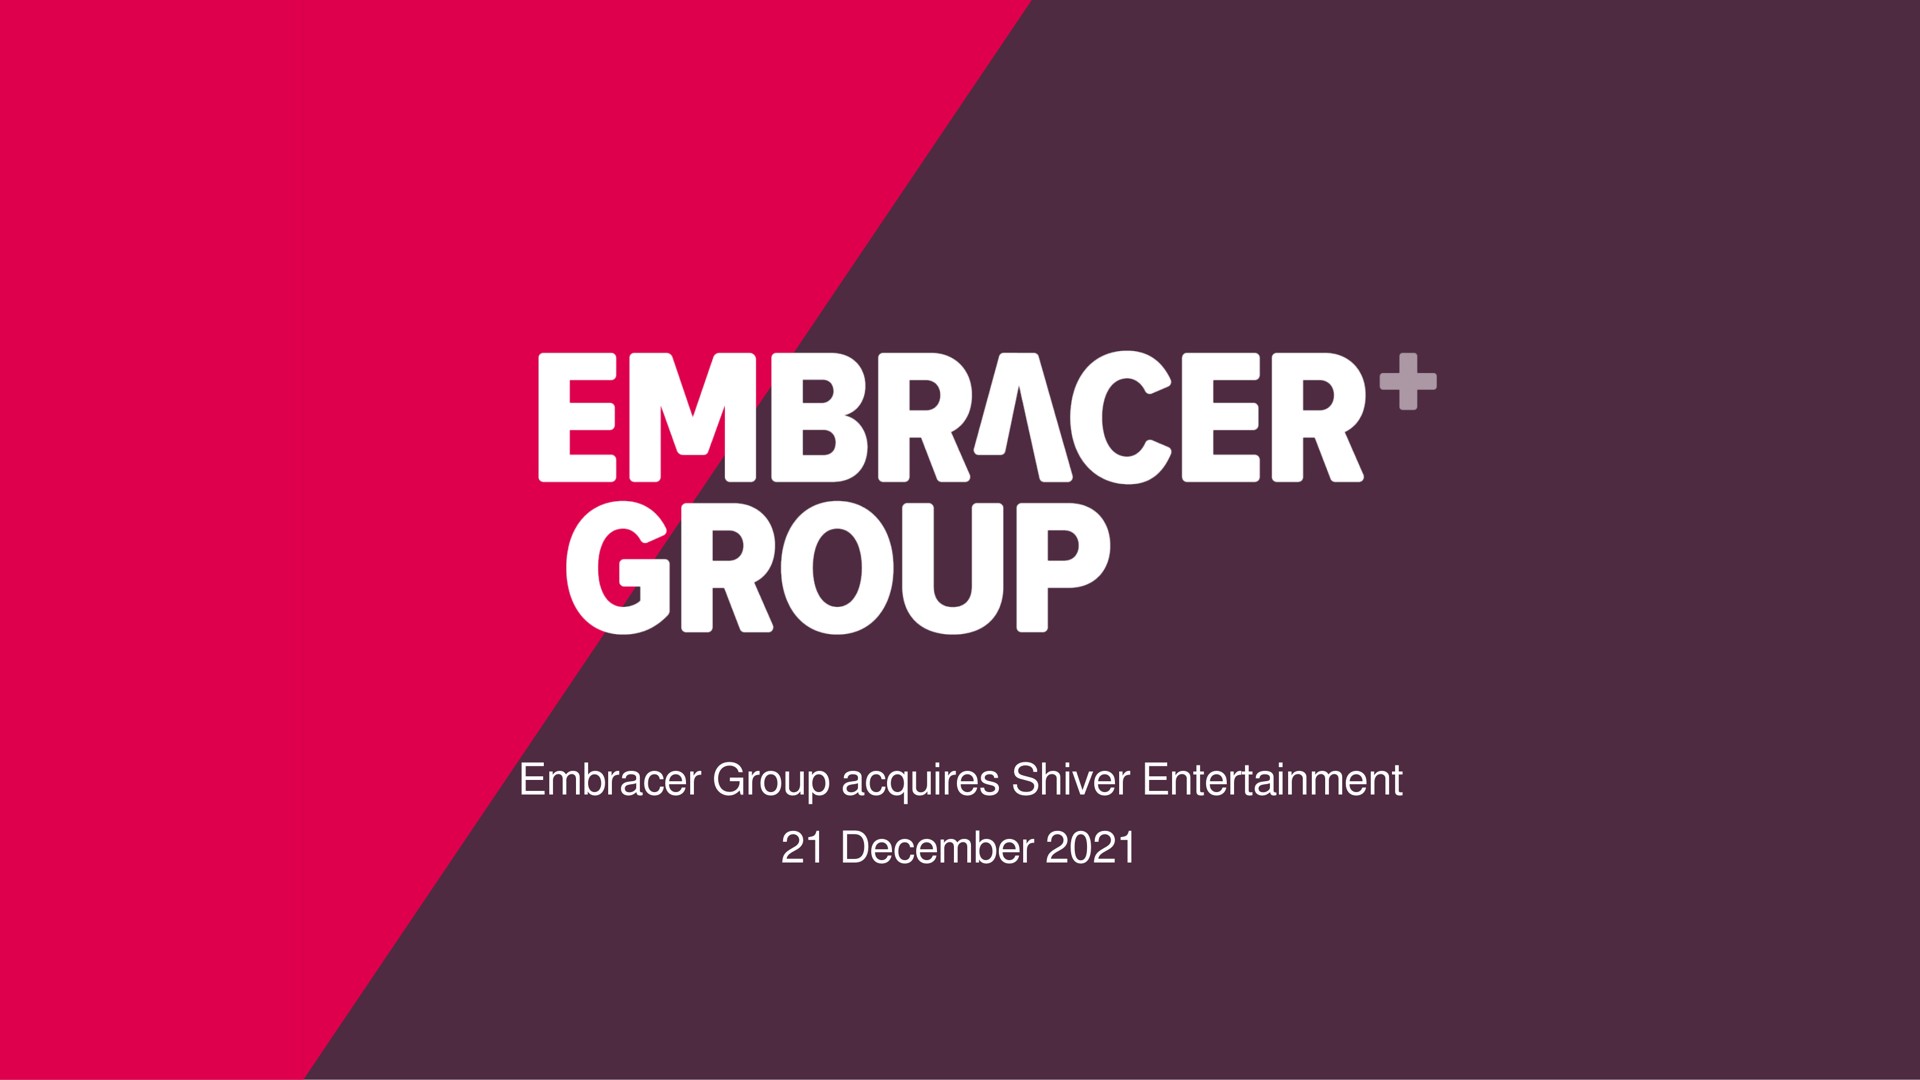 embracer group acquires shiver entertainment | Embracer Group